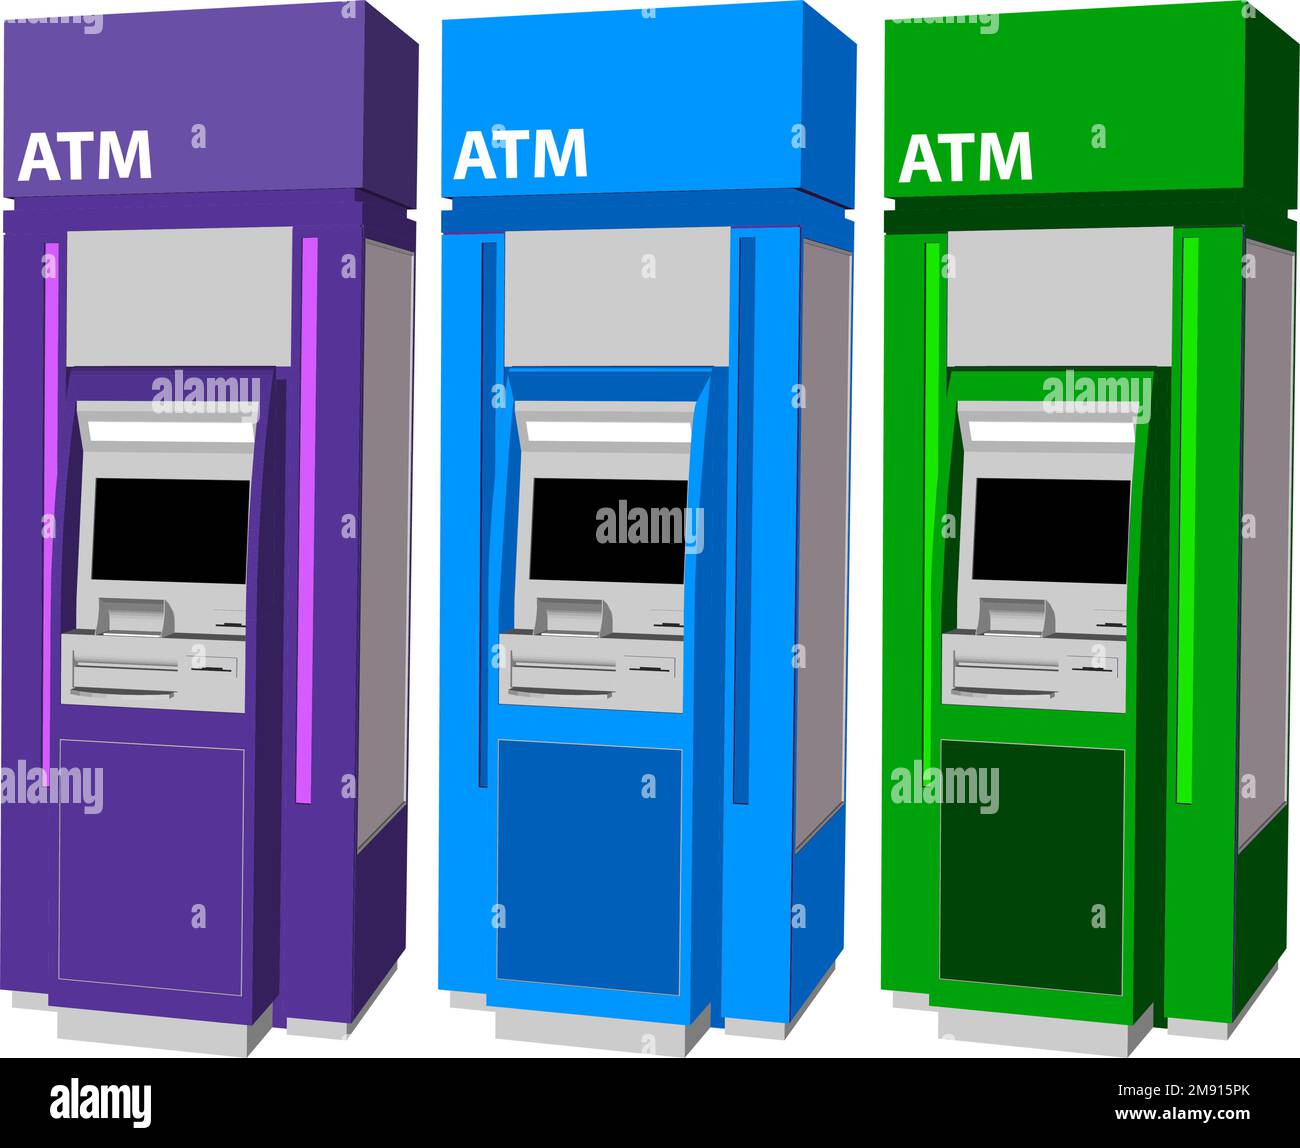 ATM bank cash machine on white background. Set of ATM machines from different sides. Isolated vector illustration Stock Vector